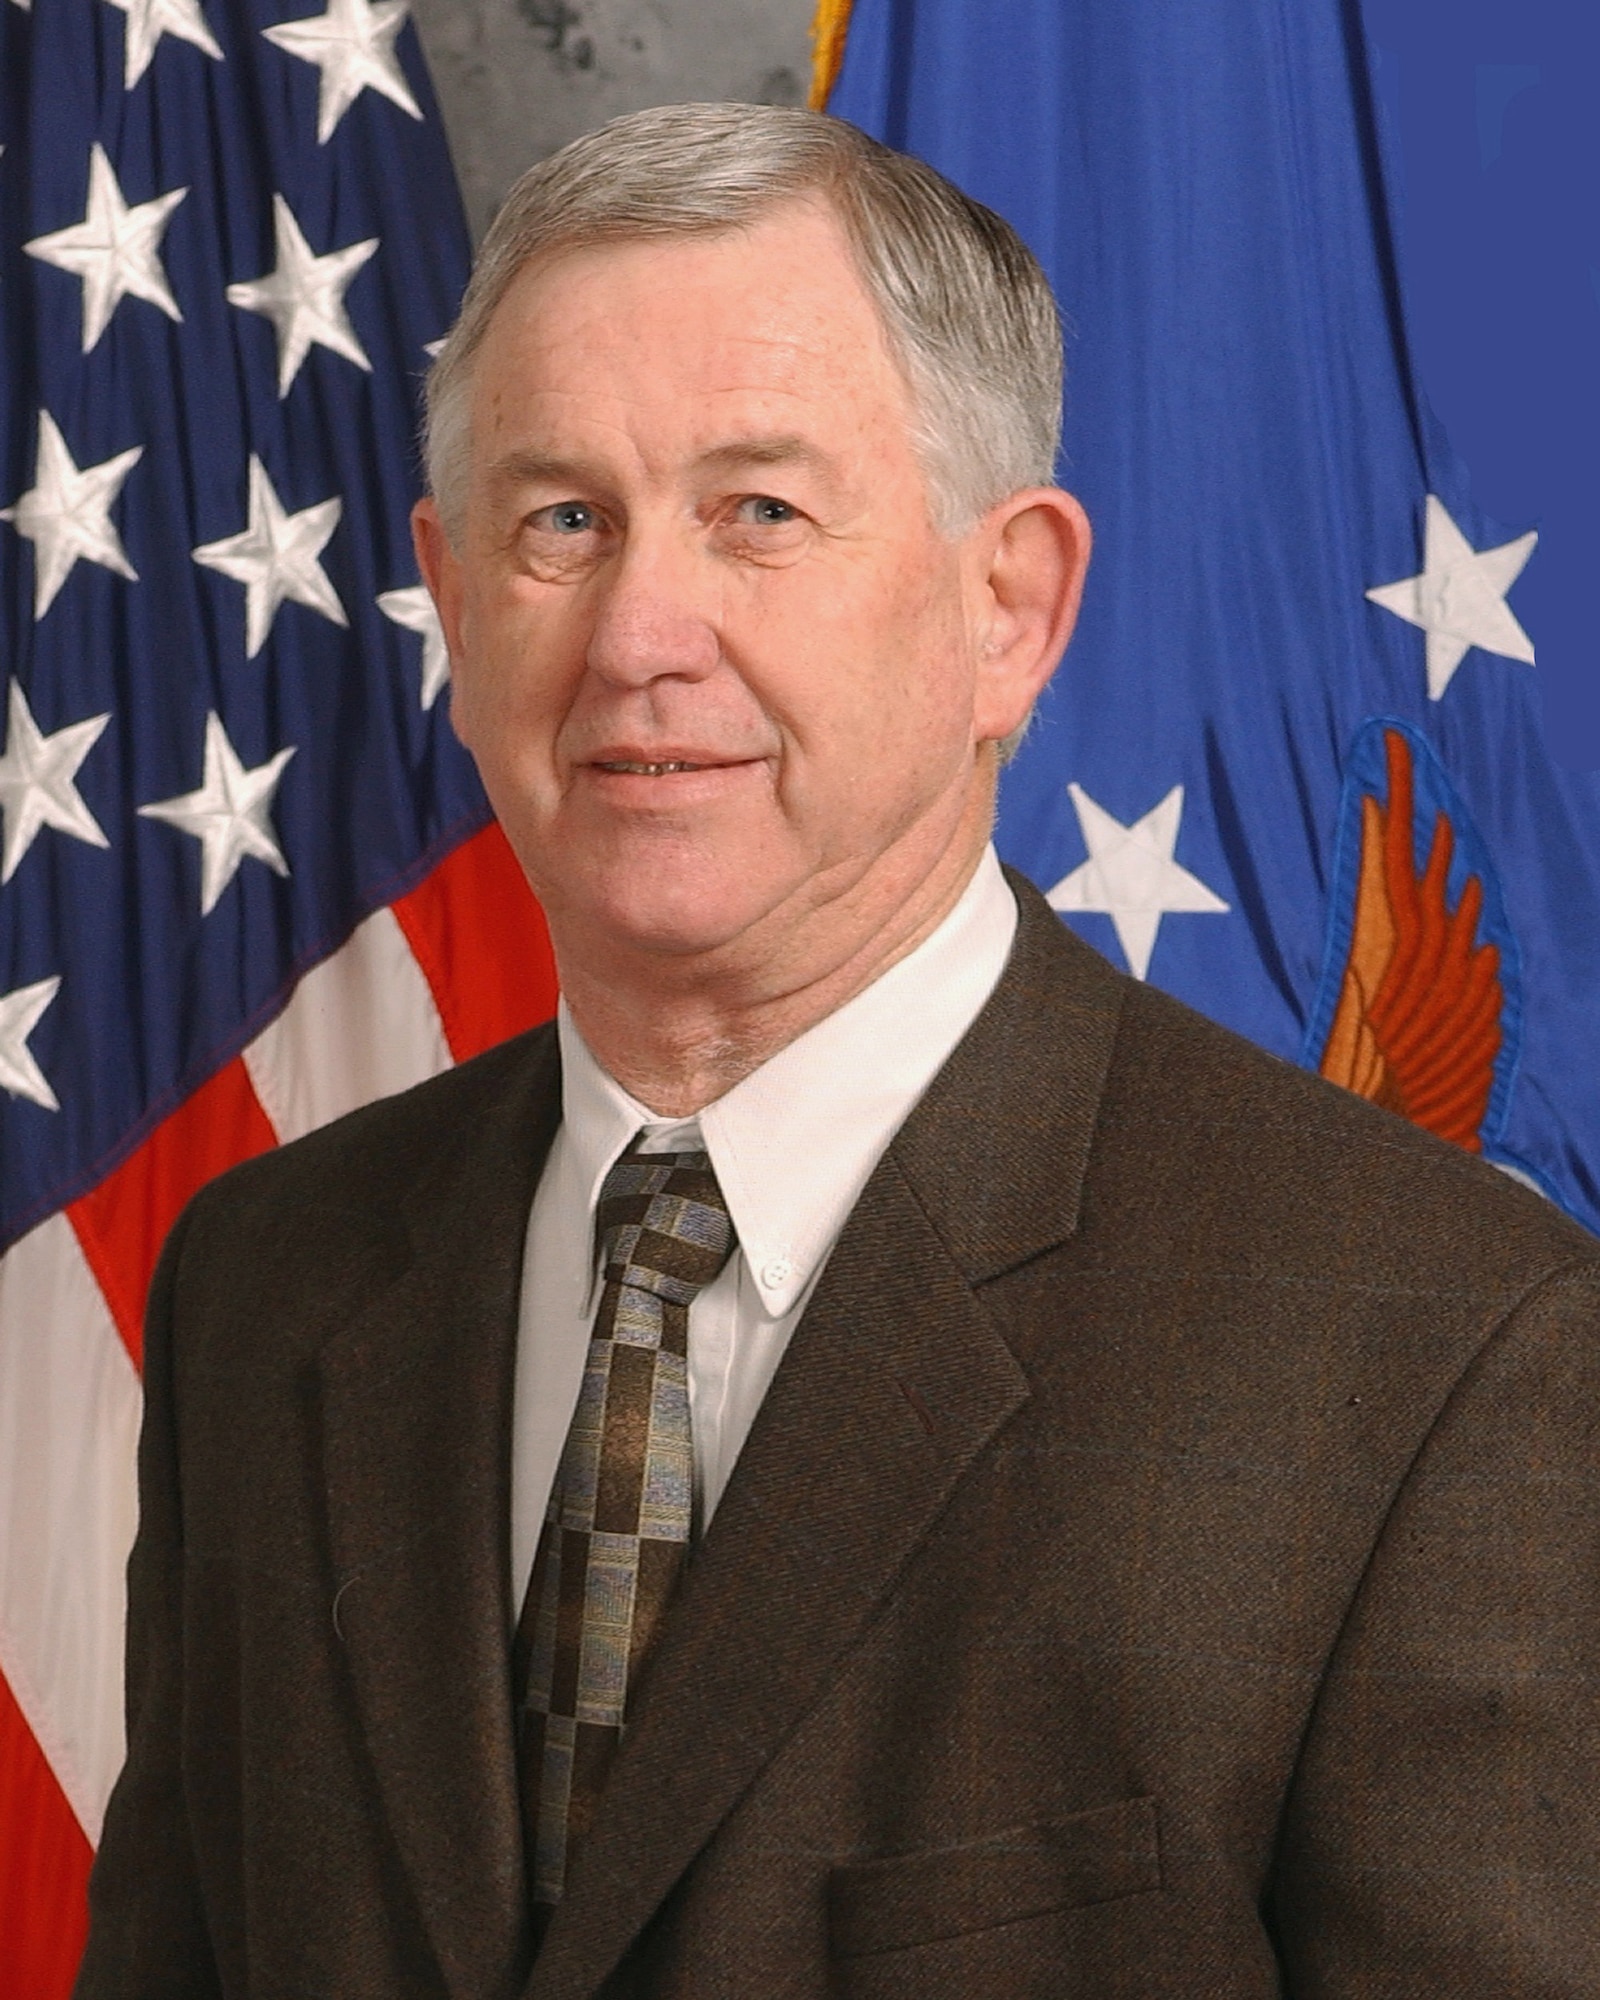 Gary Saltzburg, a member of the 27th Civil Engineer Squadron at Cannon Air Force Base, N.M., is the 2007 Air Force Special Operations Command Category 3 Civilian of the Year. (U.S. Air Force photo)